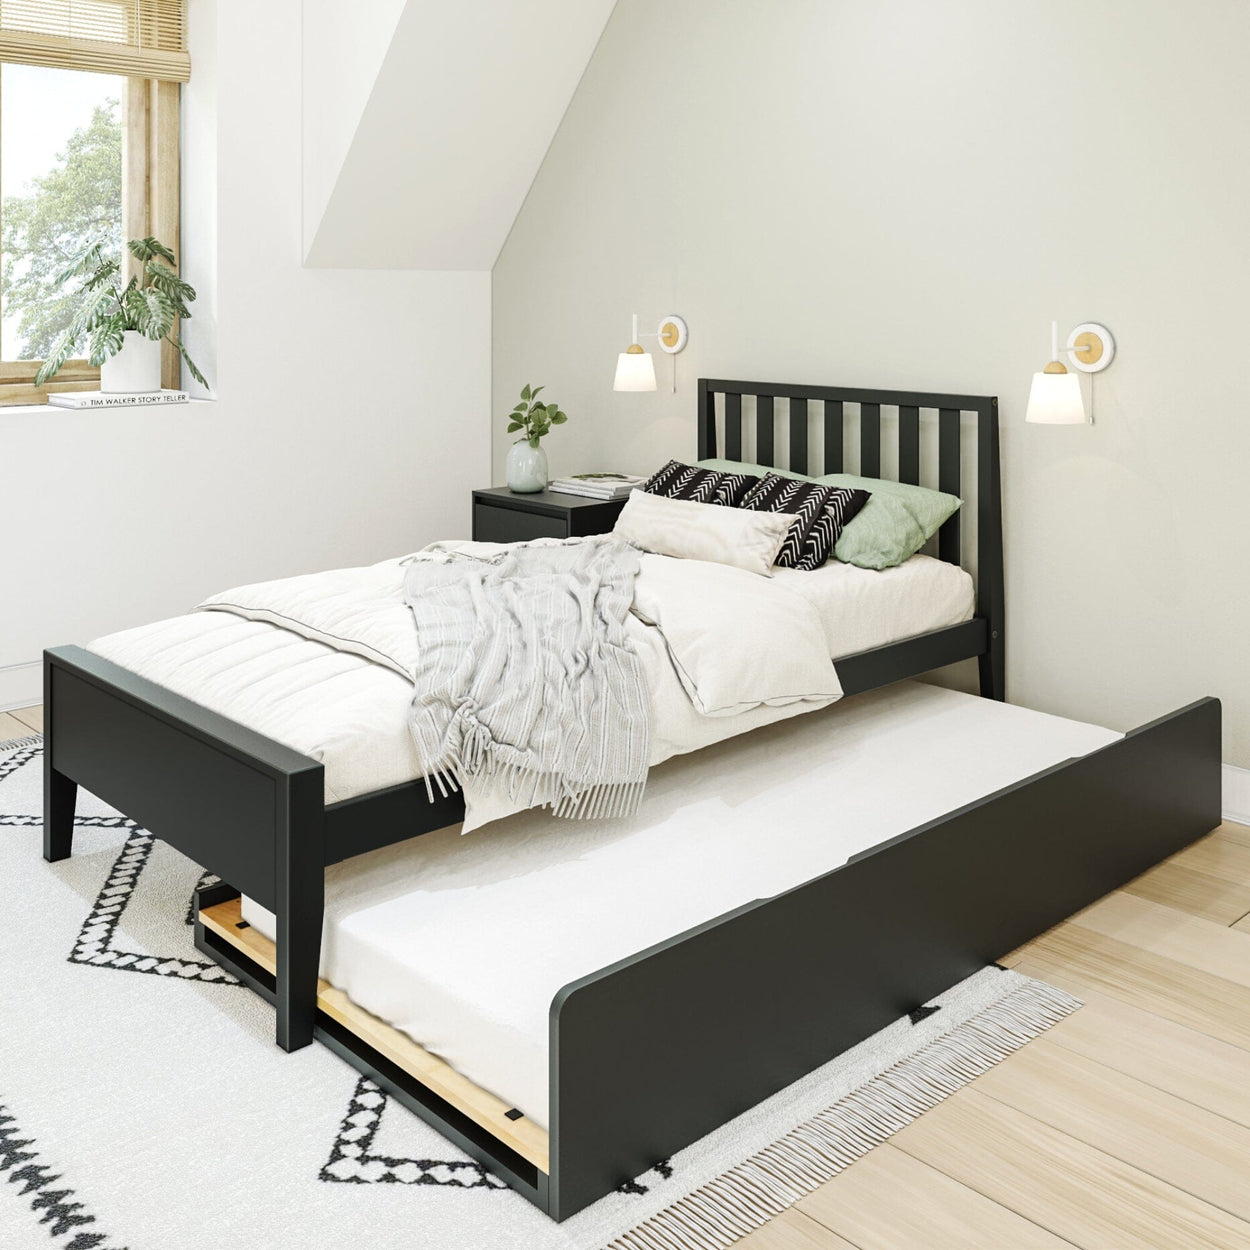 216210-170 : Kids Beds Scandinavian Twin-Size Bed with Twin-Size Trundle, Black